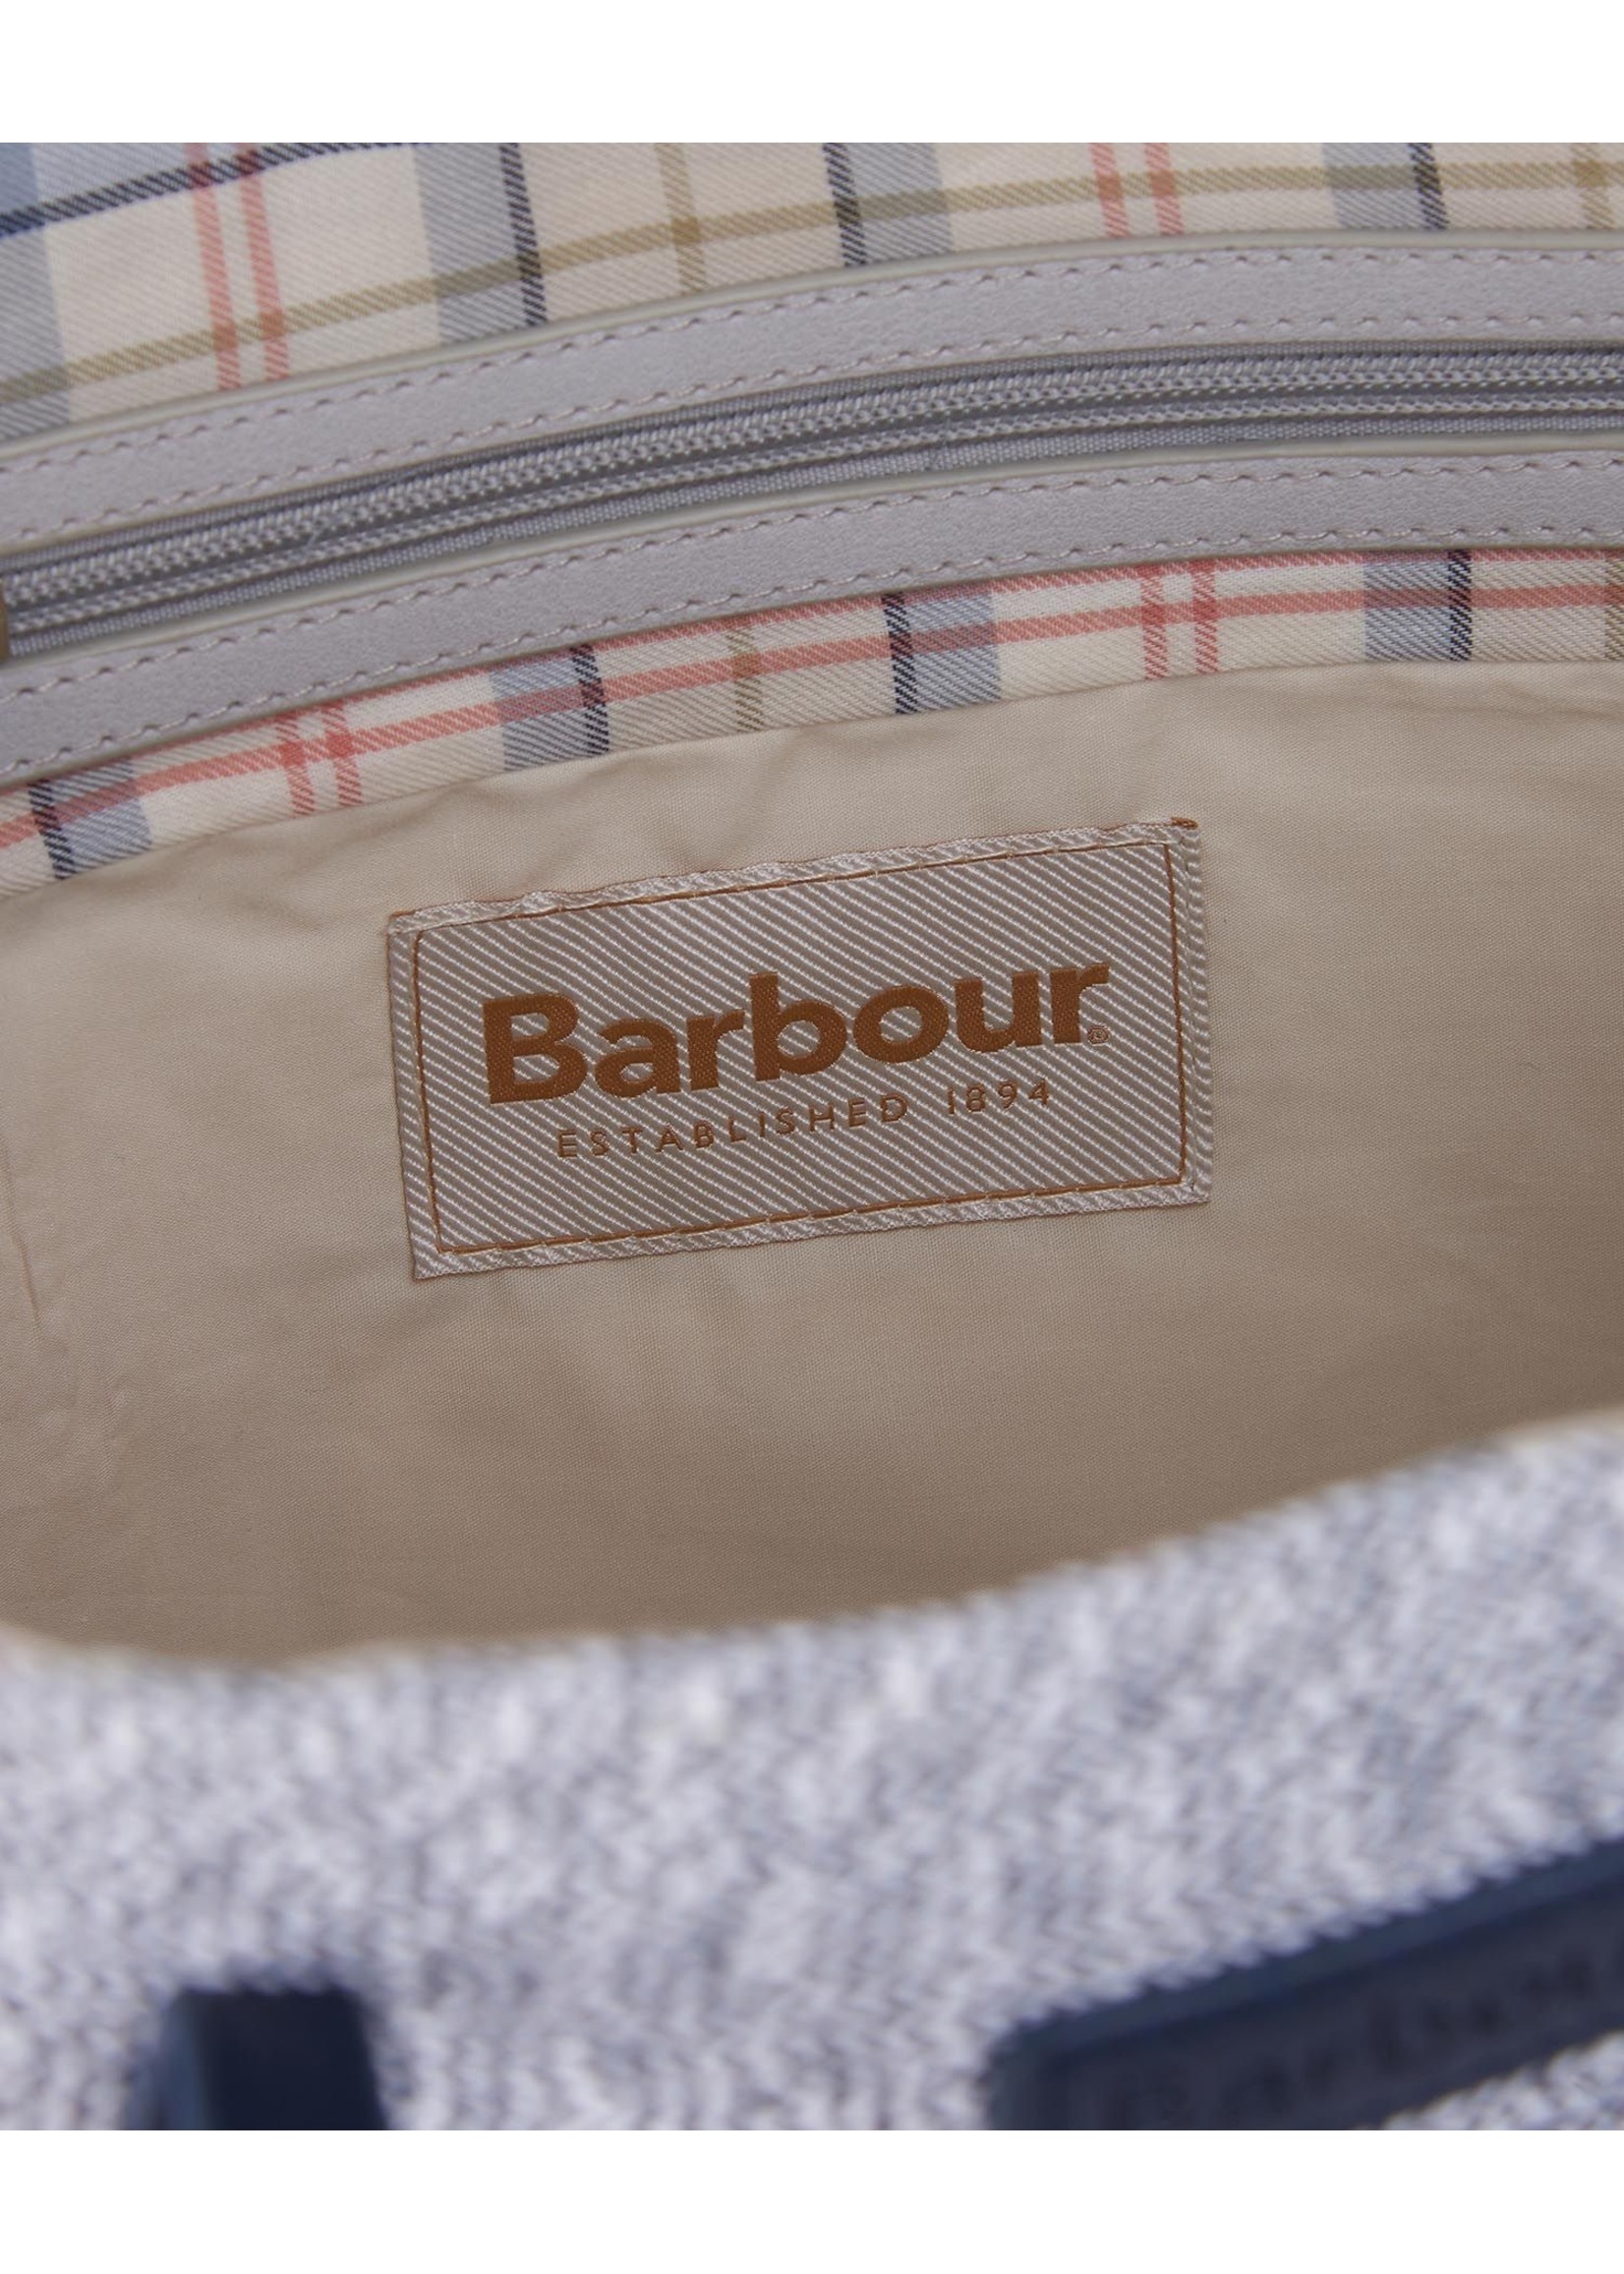 Barbour CHRISTIE TOTE